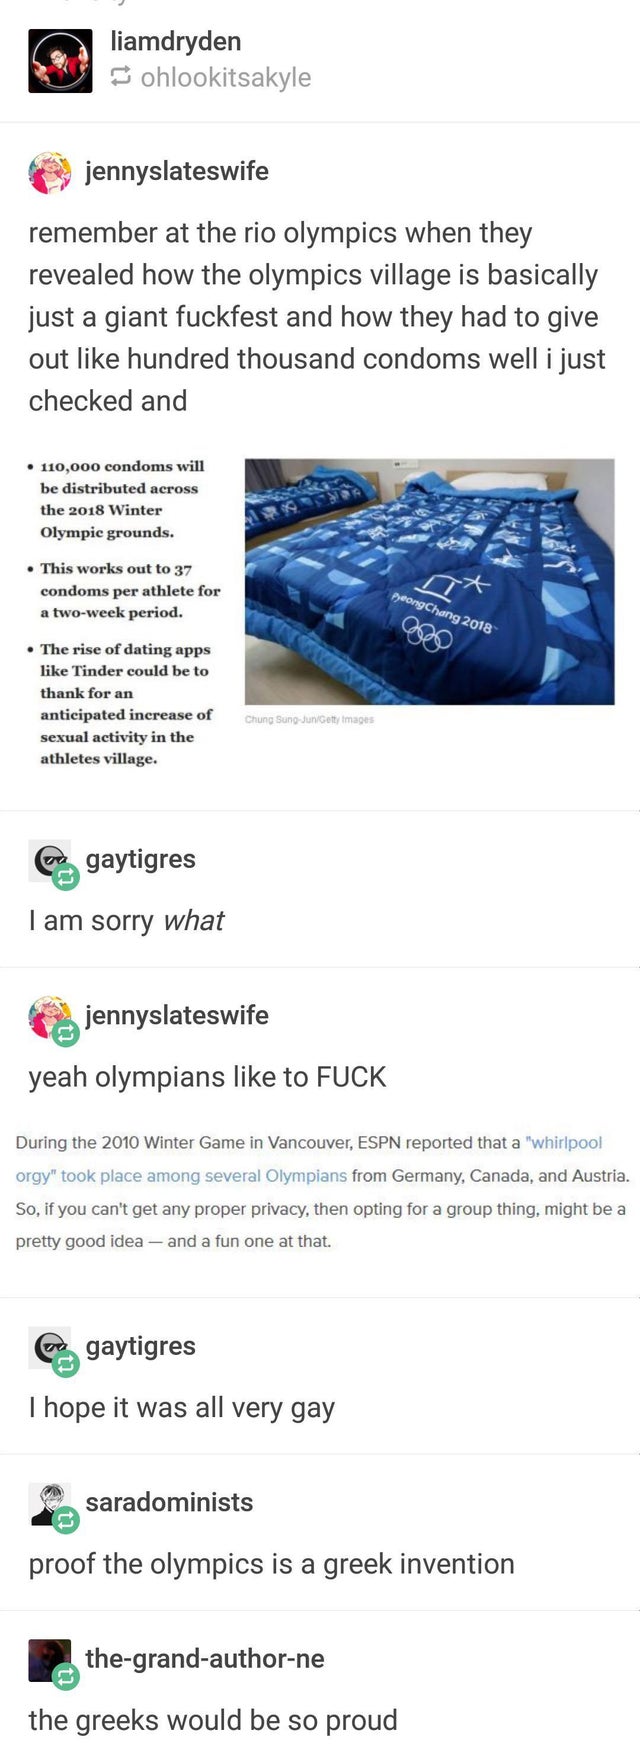 web page - liamdryden ohlookitsakyle jennyslateswife remember at the rio olympics when they revealed how the olympics village is basically just a giant fuckfest and how they had to give out hundred thousand condoms well i just checked and 110,000 condoms 